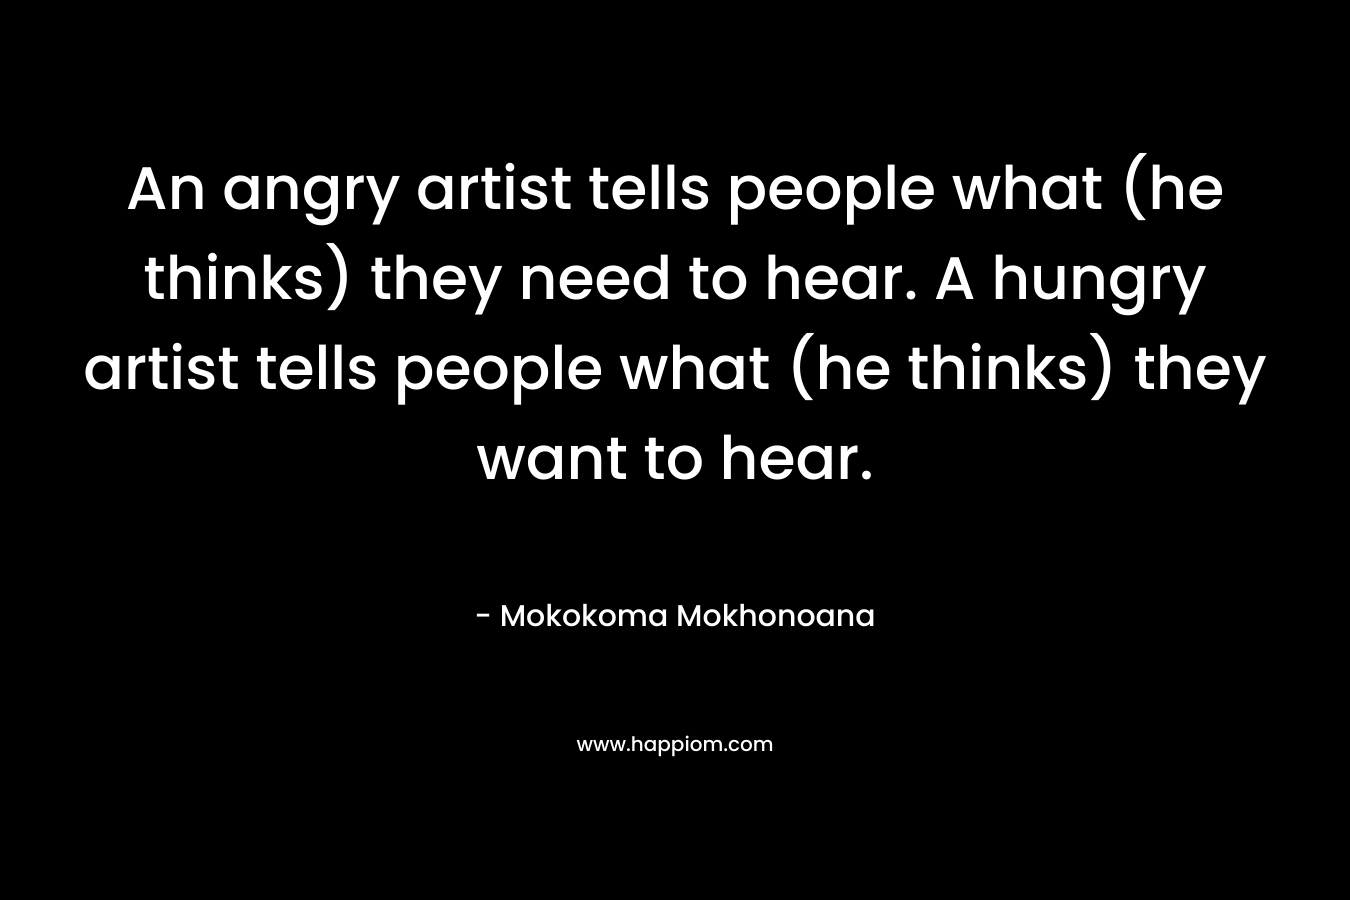 An angry artist tells people what (he thinks) they need to hear. A hungry artist tells people what (he thinks) they want to hear.